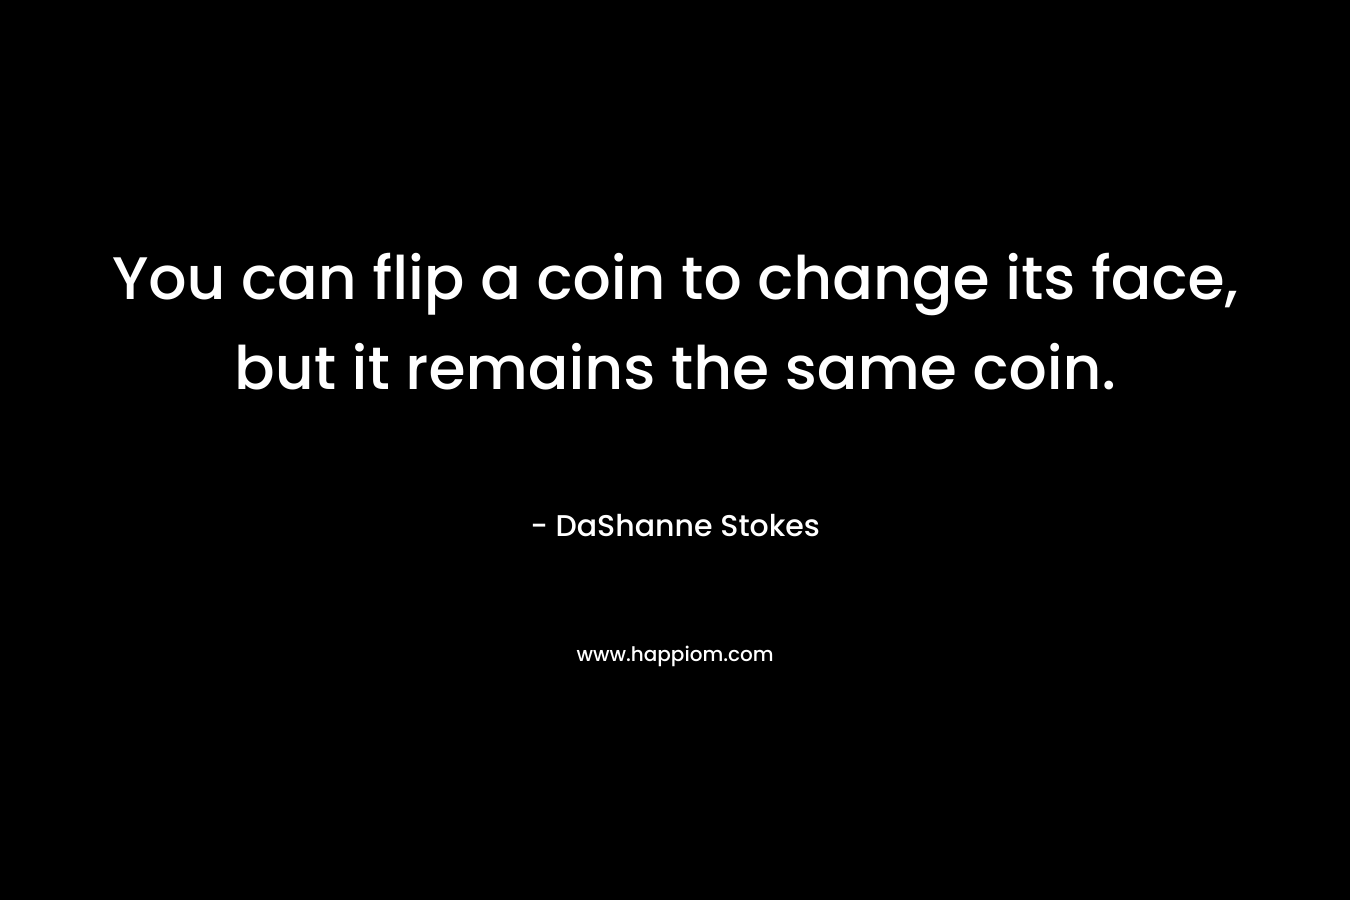 You can flip a coin to change its face, but it remains the same coin.